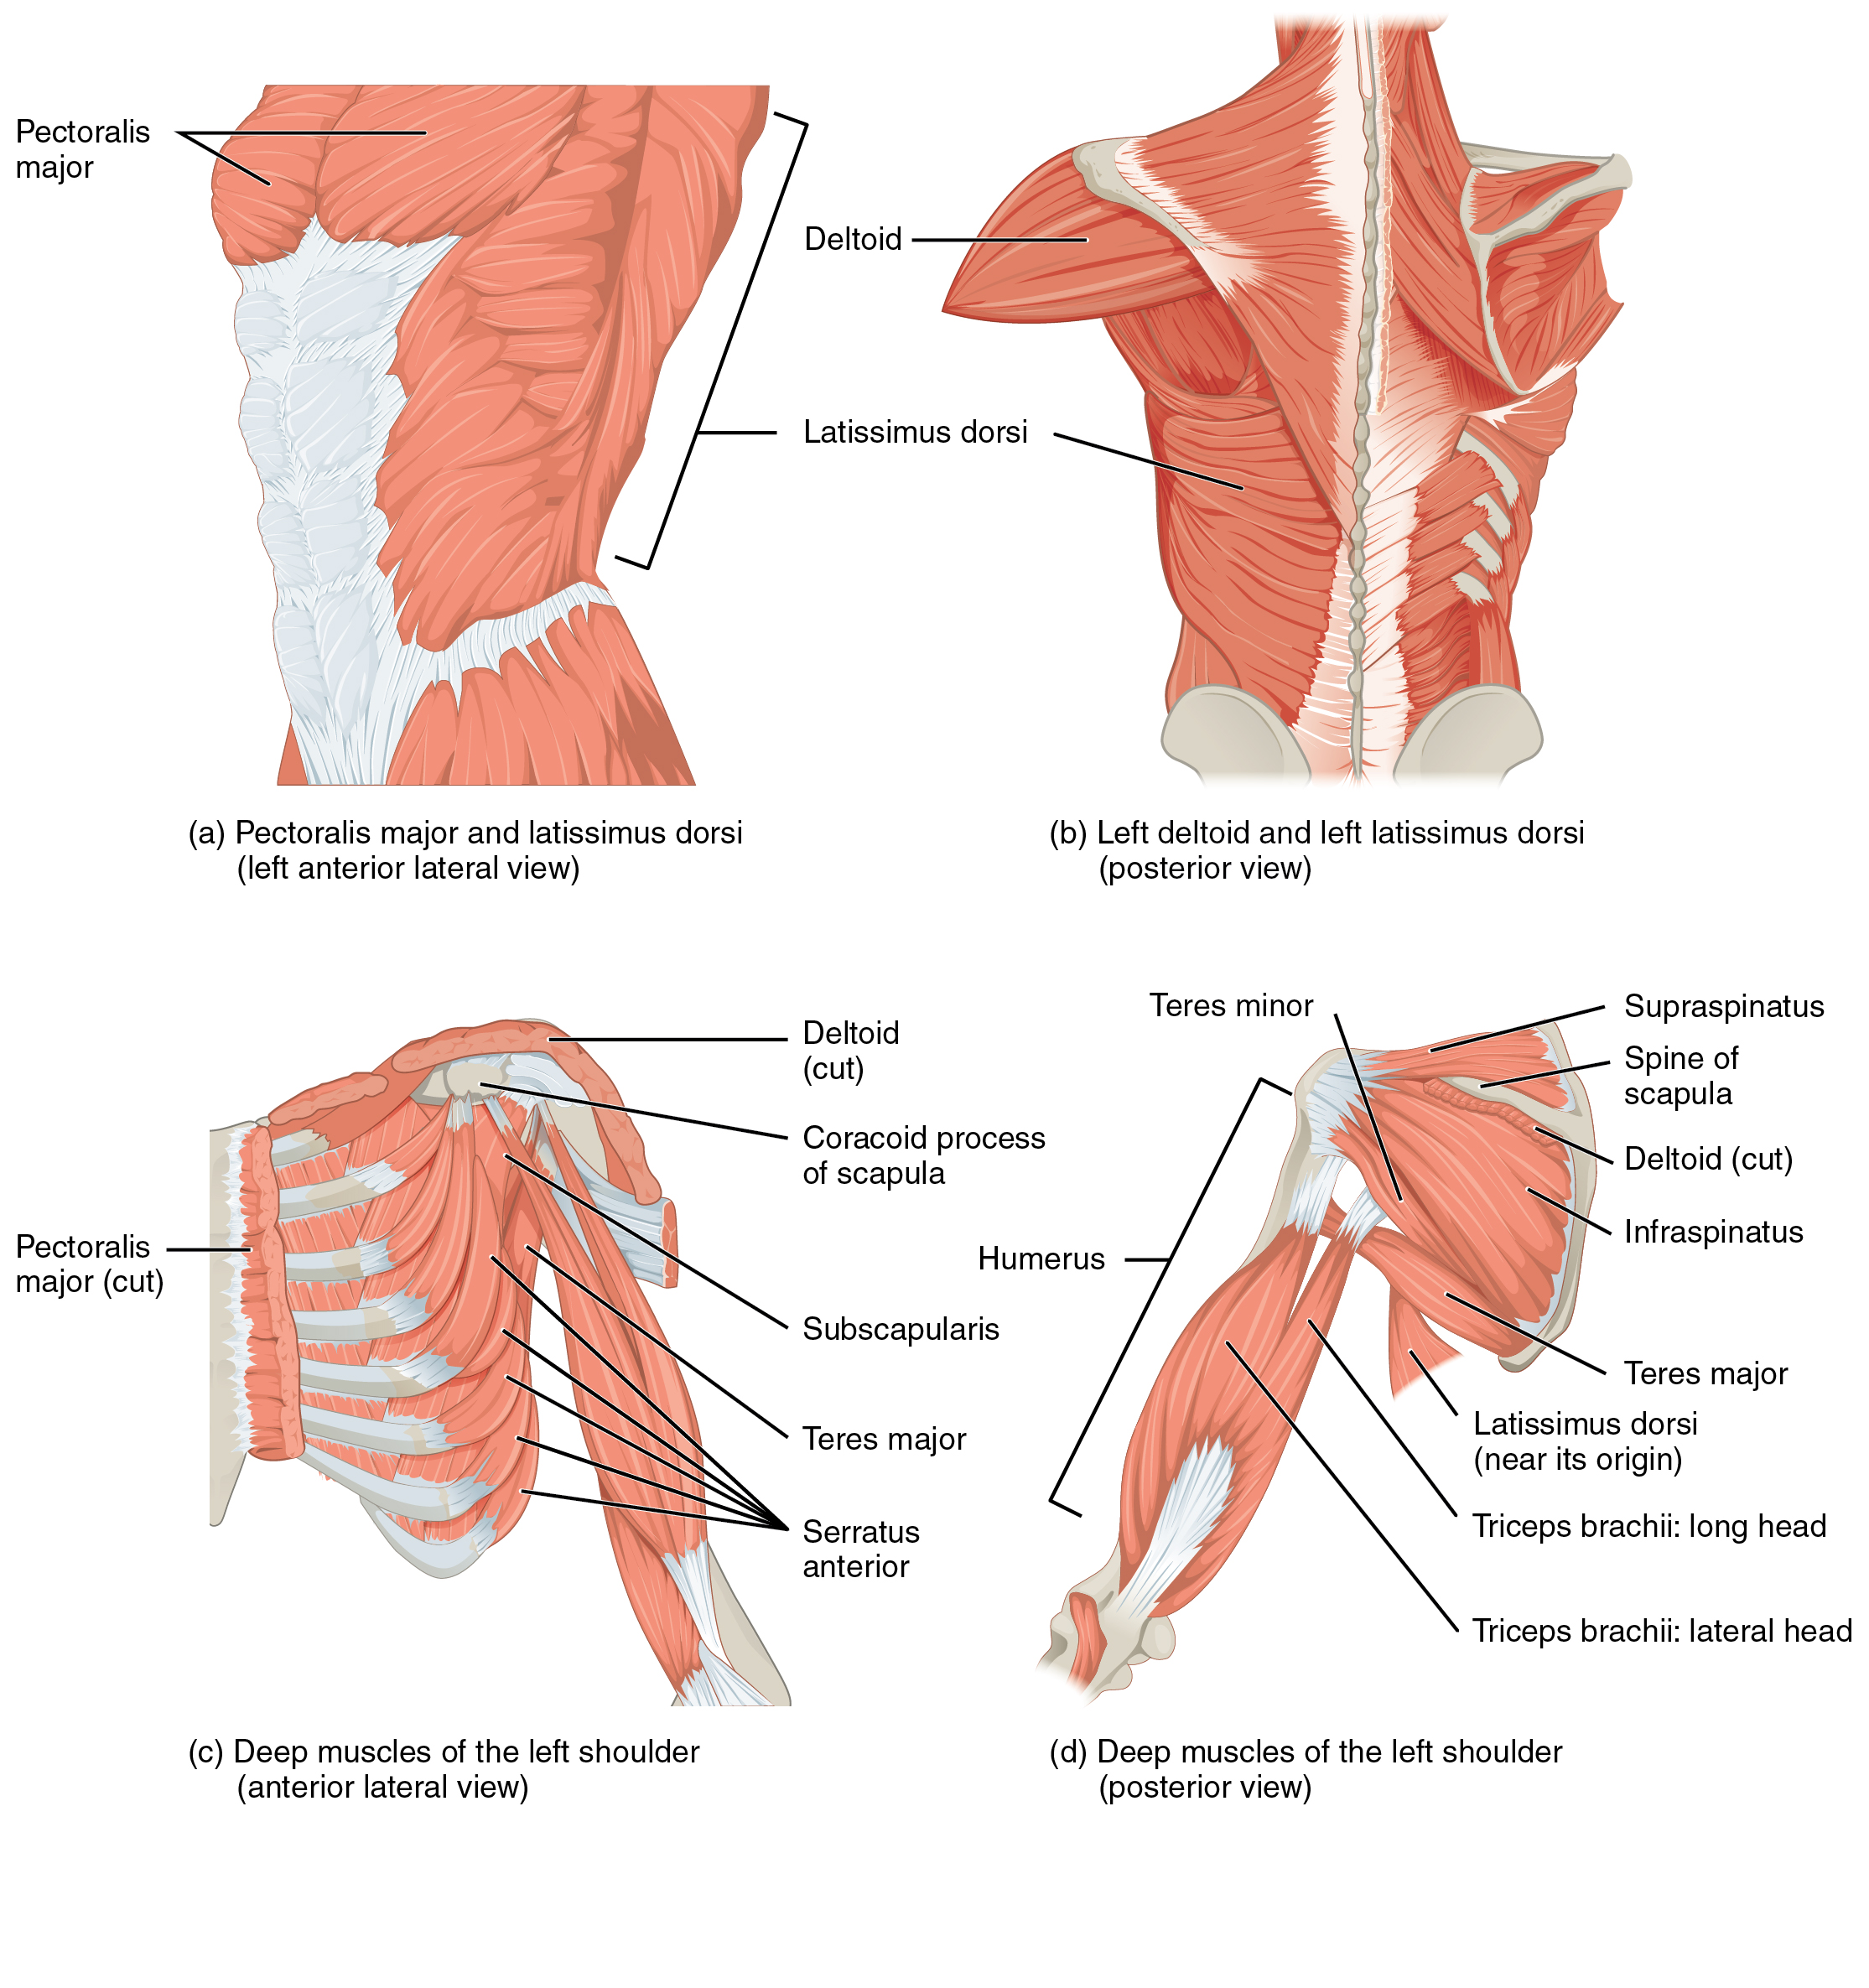 The top left panel shows the lateral view of the pectoral and back muscles. The top right panel shows the posterior view of the right deltoid and the left back muscle. The bottom left panel shows the anterior view of the deep muscles of the left shoulder, and the bottom right panel shows the deep muscles of the left shoulder.